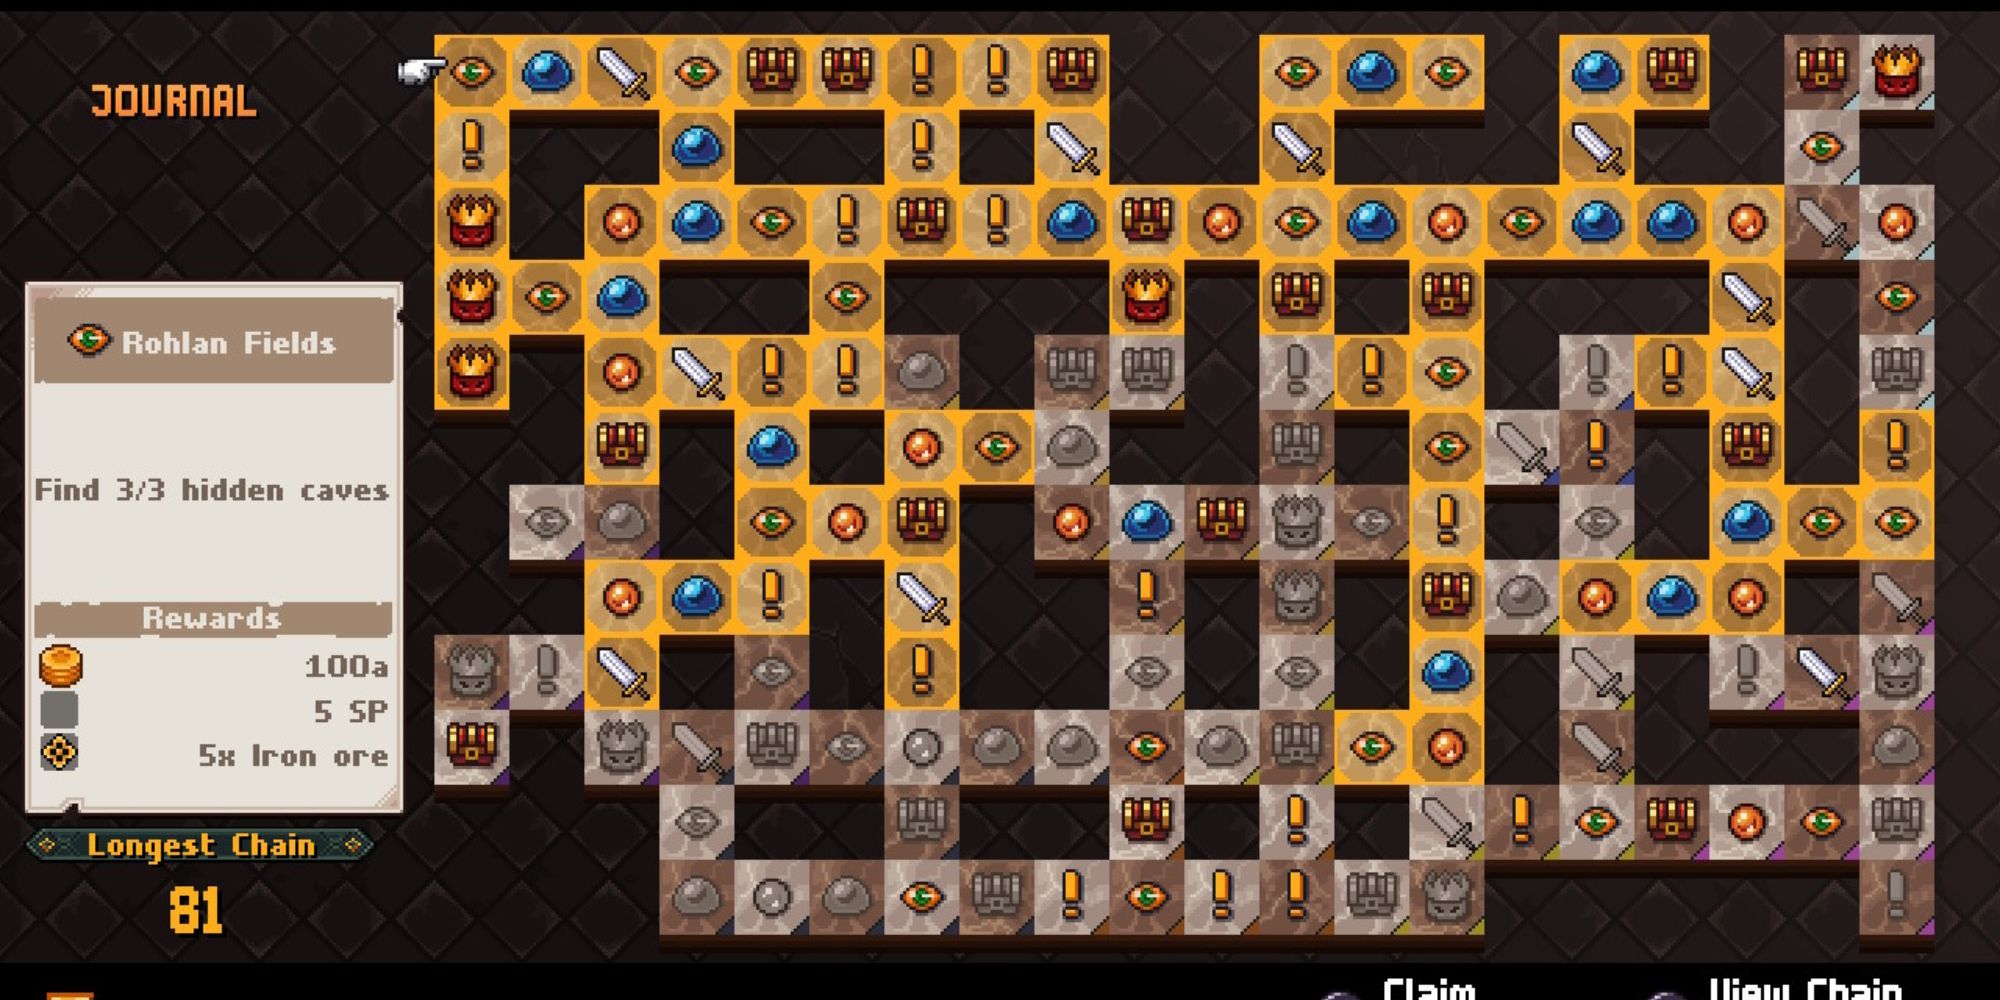 Chained Echoes - Reward Board for Rohlan Fields, highlighting a tile that wants you to find Three Hidden Caves